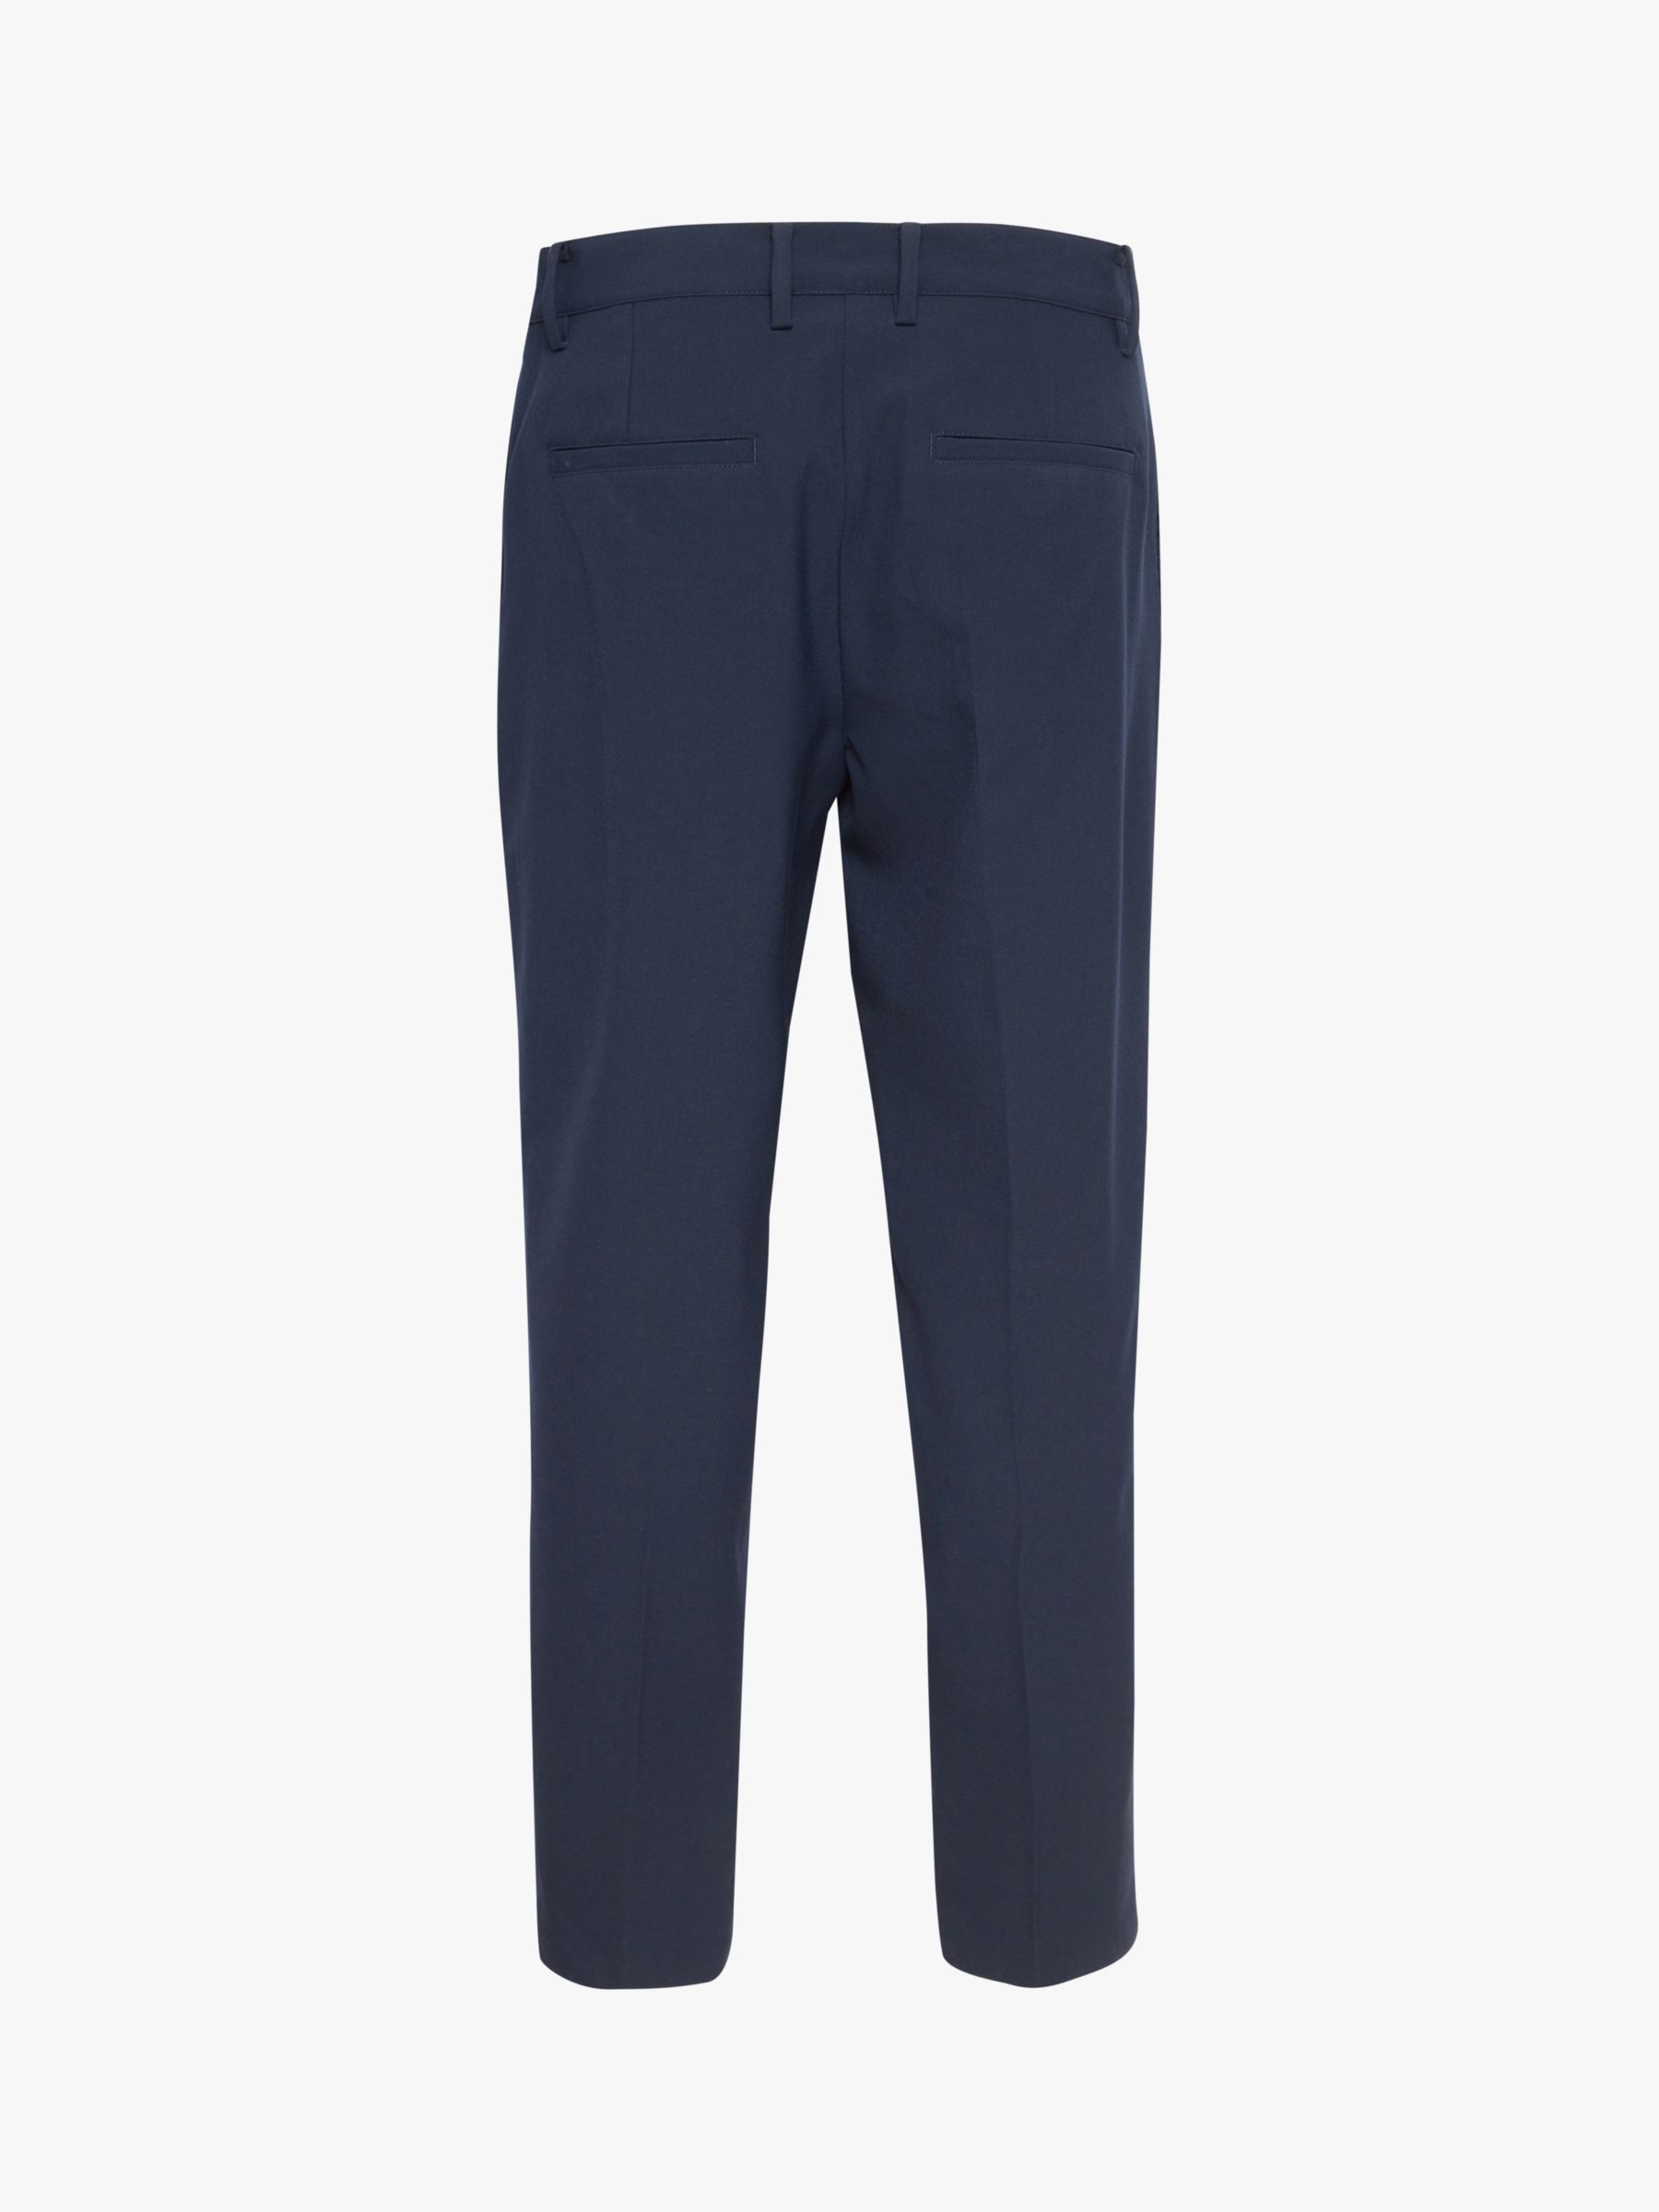 Buy Casual Friday Pepe Stretch Trousers Online at johnlewis.com